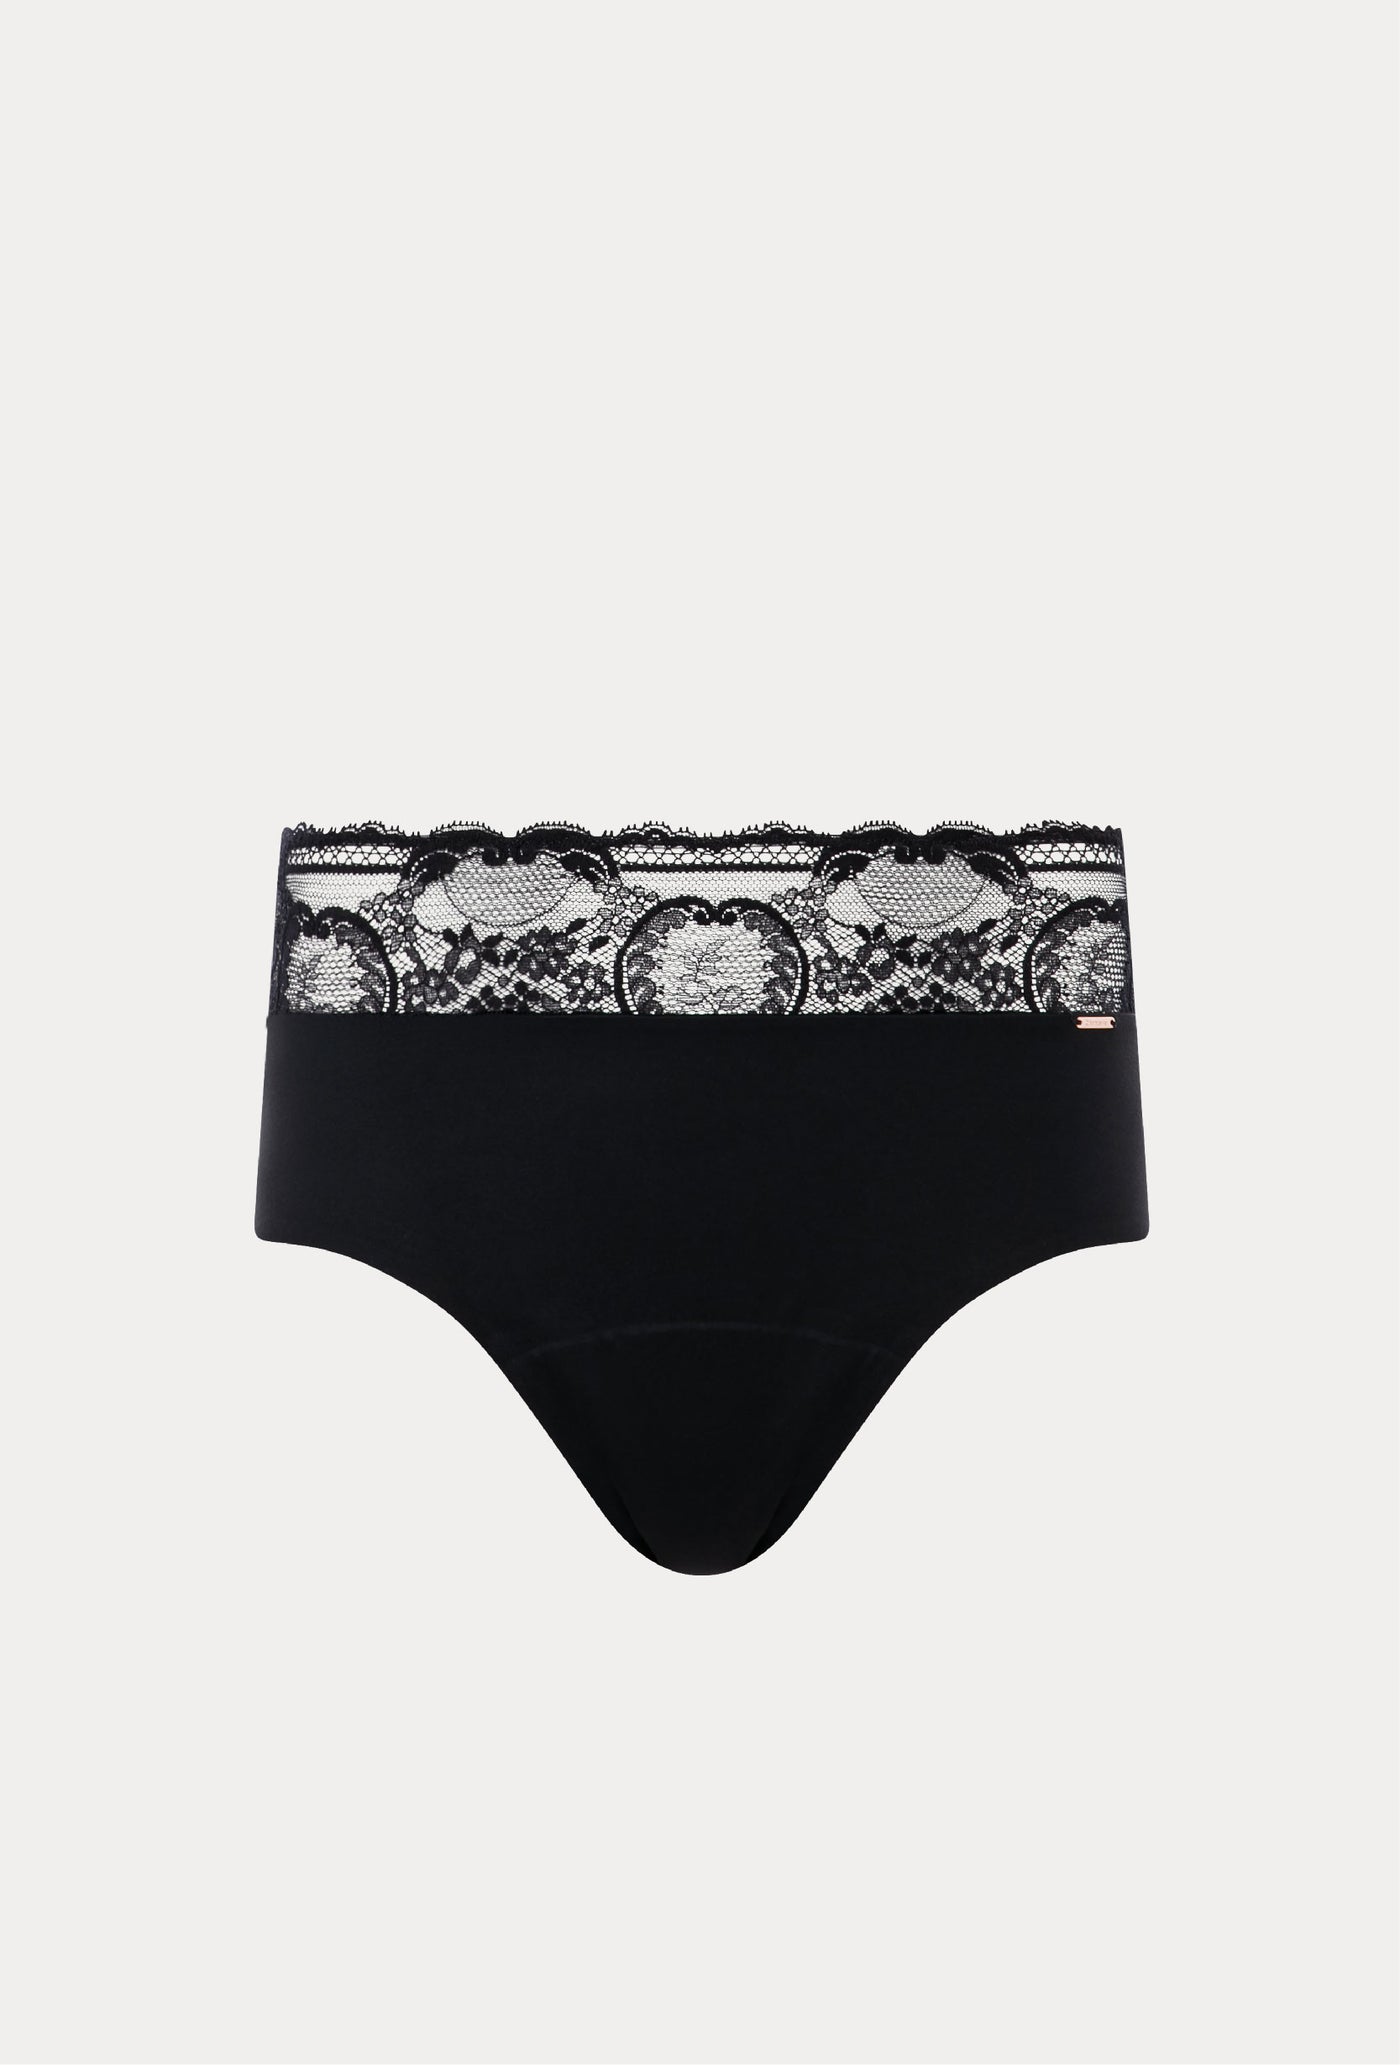 Chantelle Life Period Panty Lace Highwaist Brief